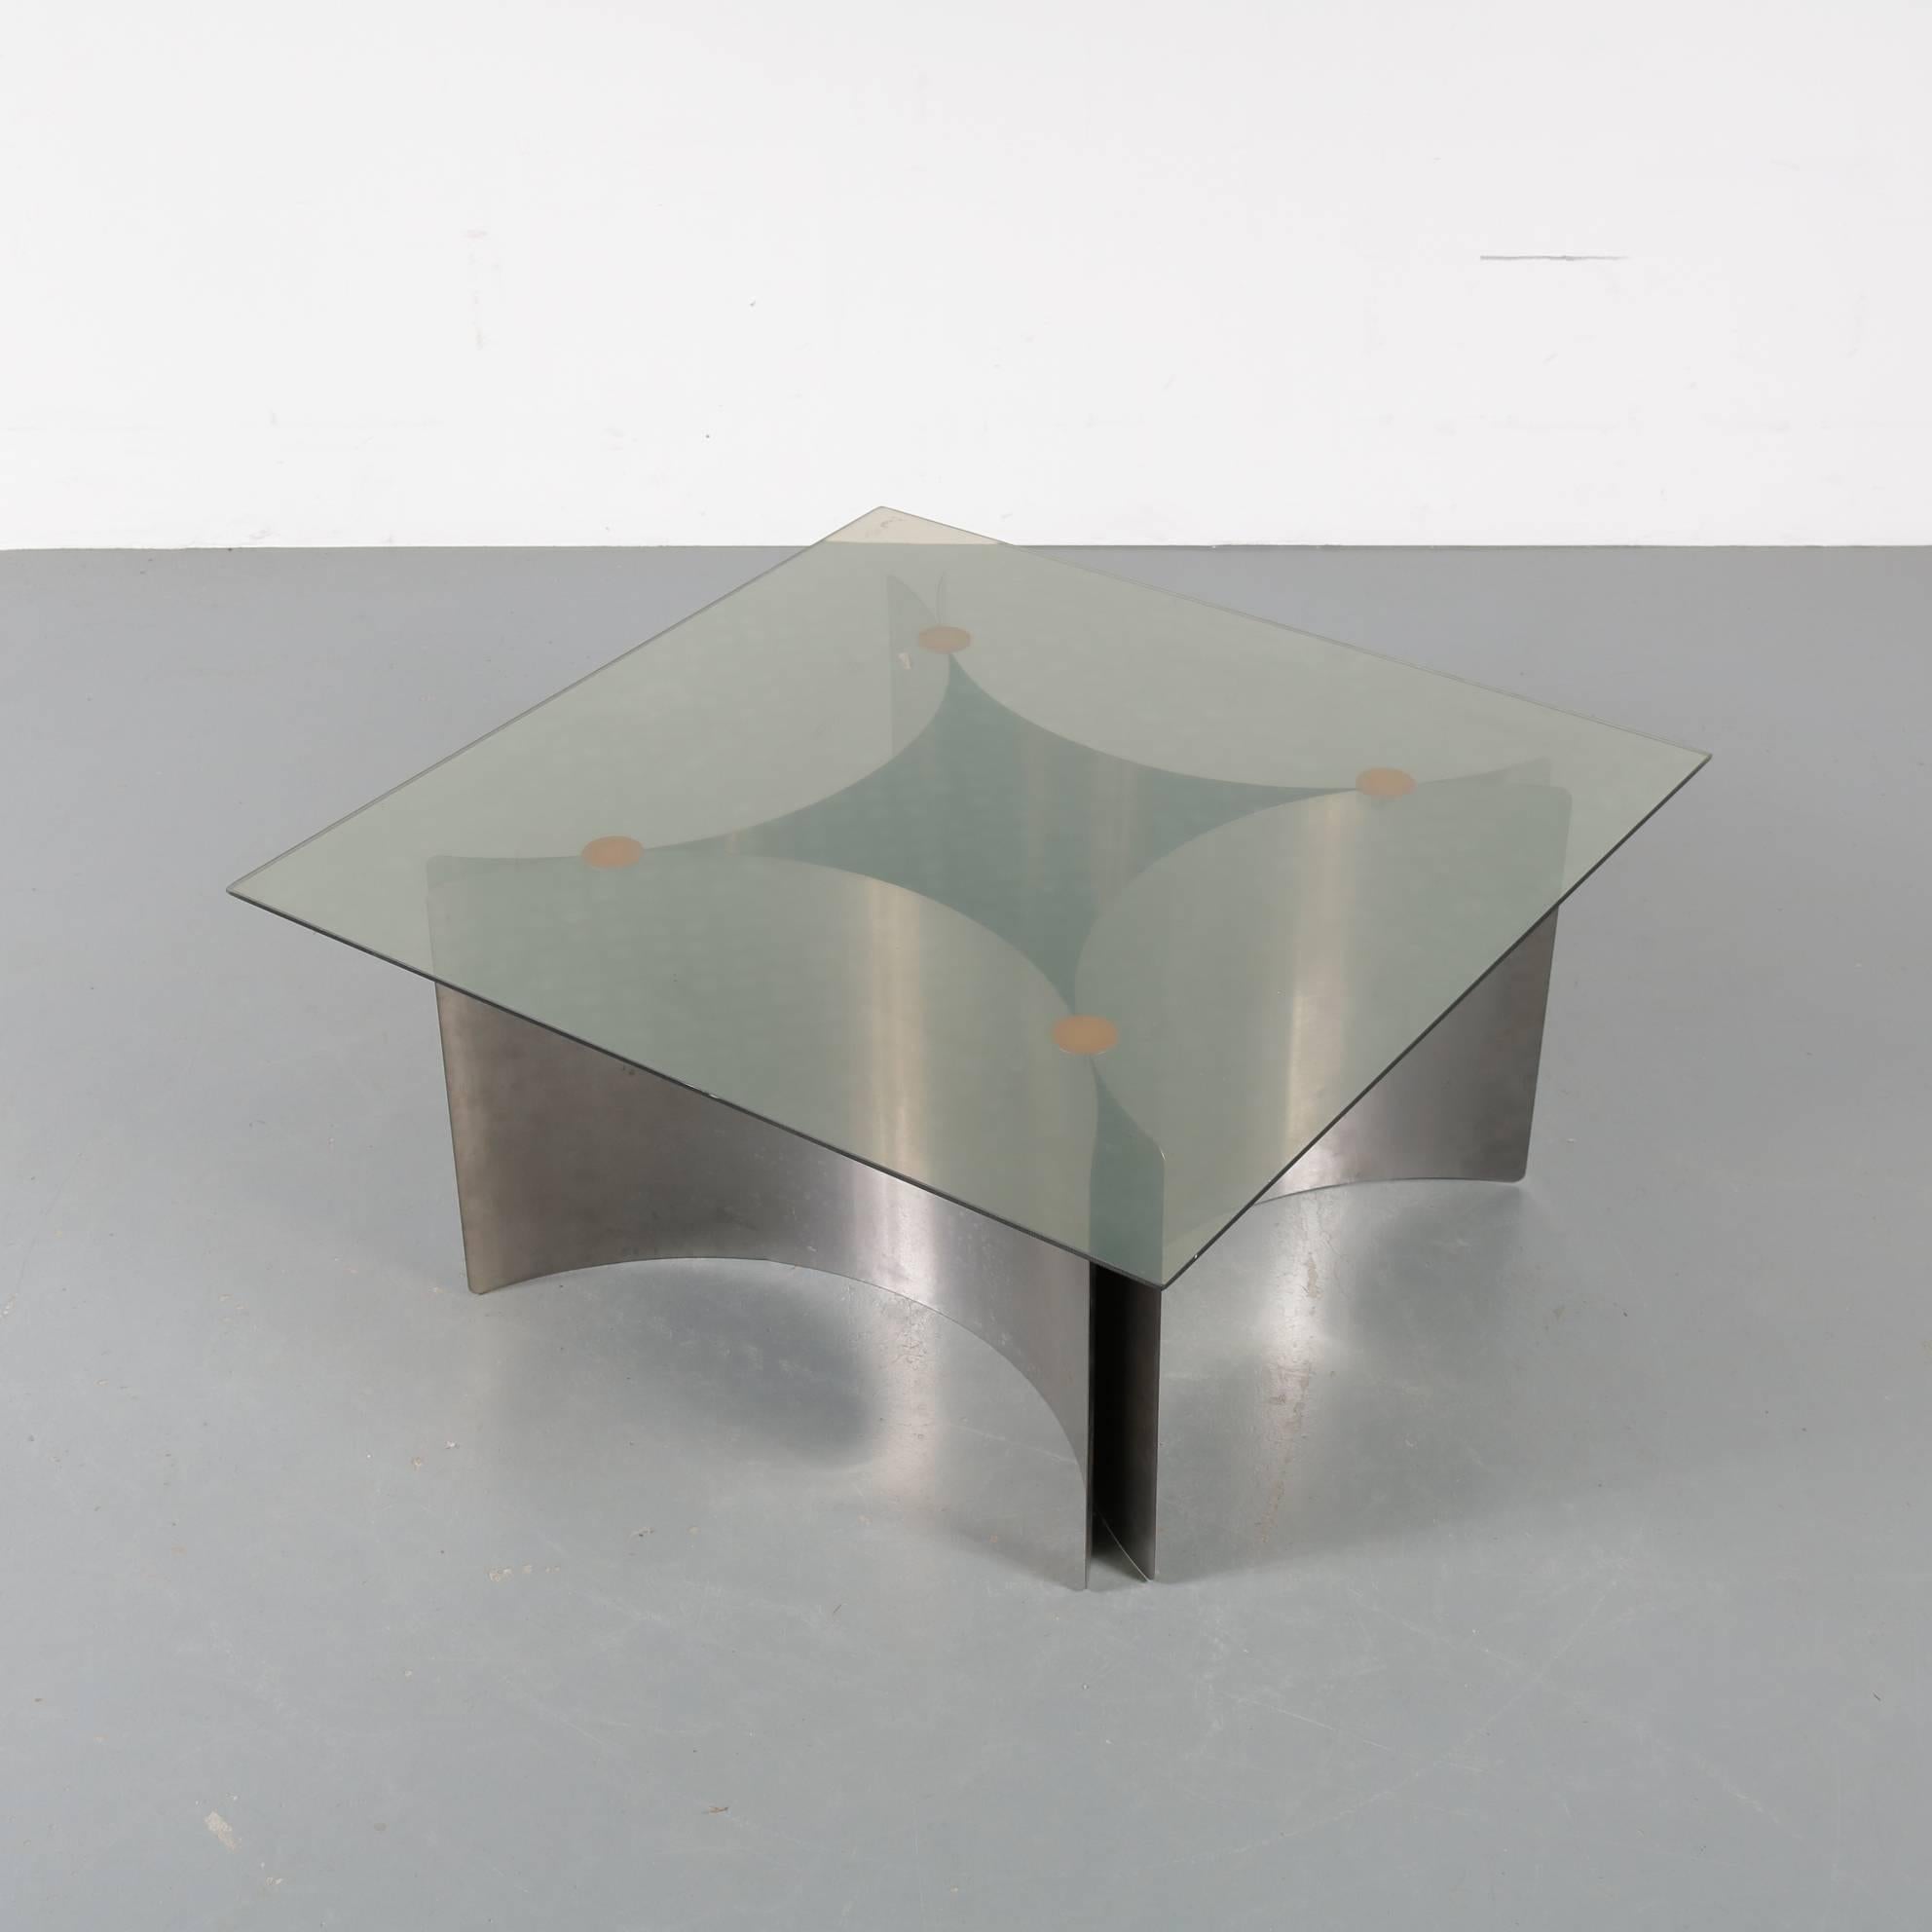 A wonderful coffee table, attributed to Ringo Starr and Robin Cruikshank for ROR in the United Kingdom, circa 1970.

It has a bent, chrome plated metal frame made of four plates that create a diamond shaped base. The clear glass square top adds